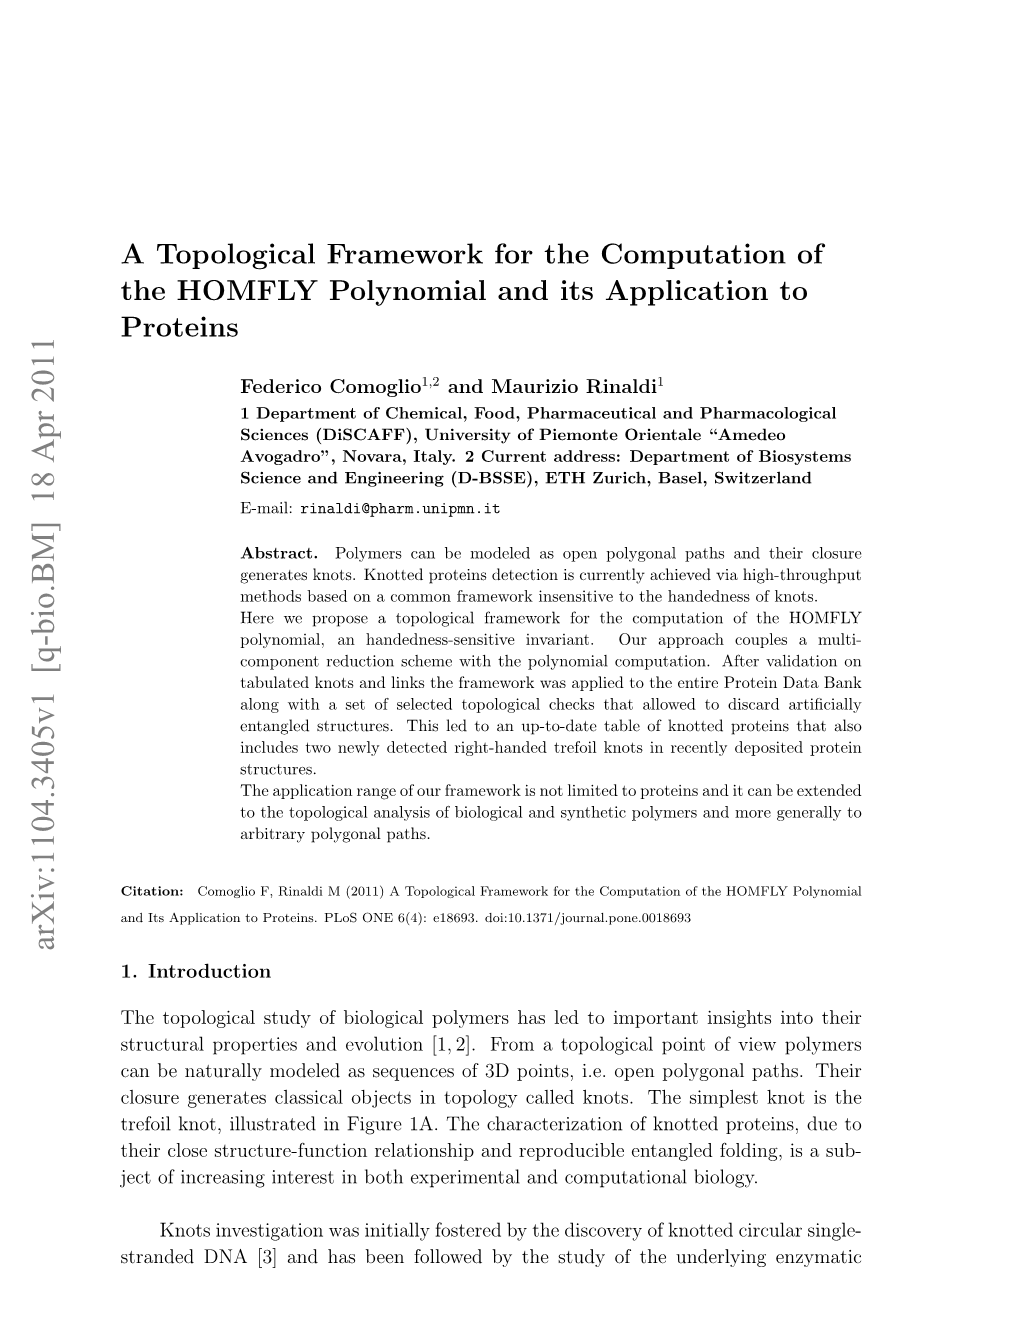 A Topological Framework for the Computation of the HOMFLY Polynomial and Its Application to Proteins